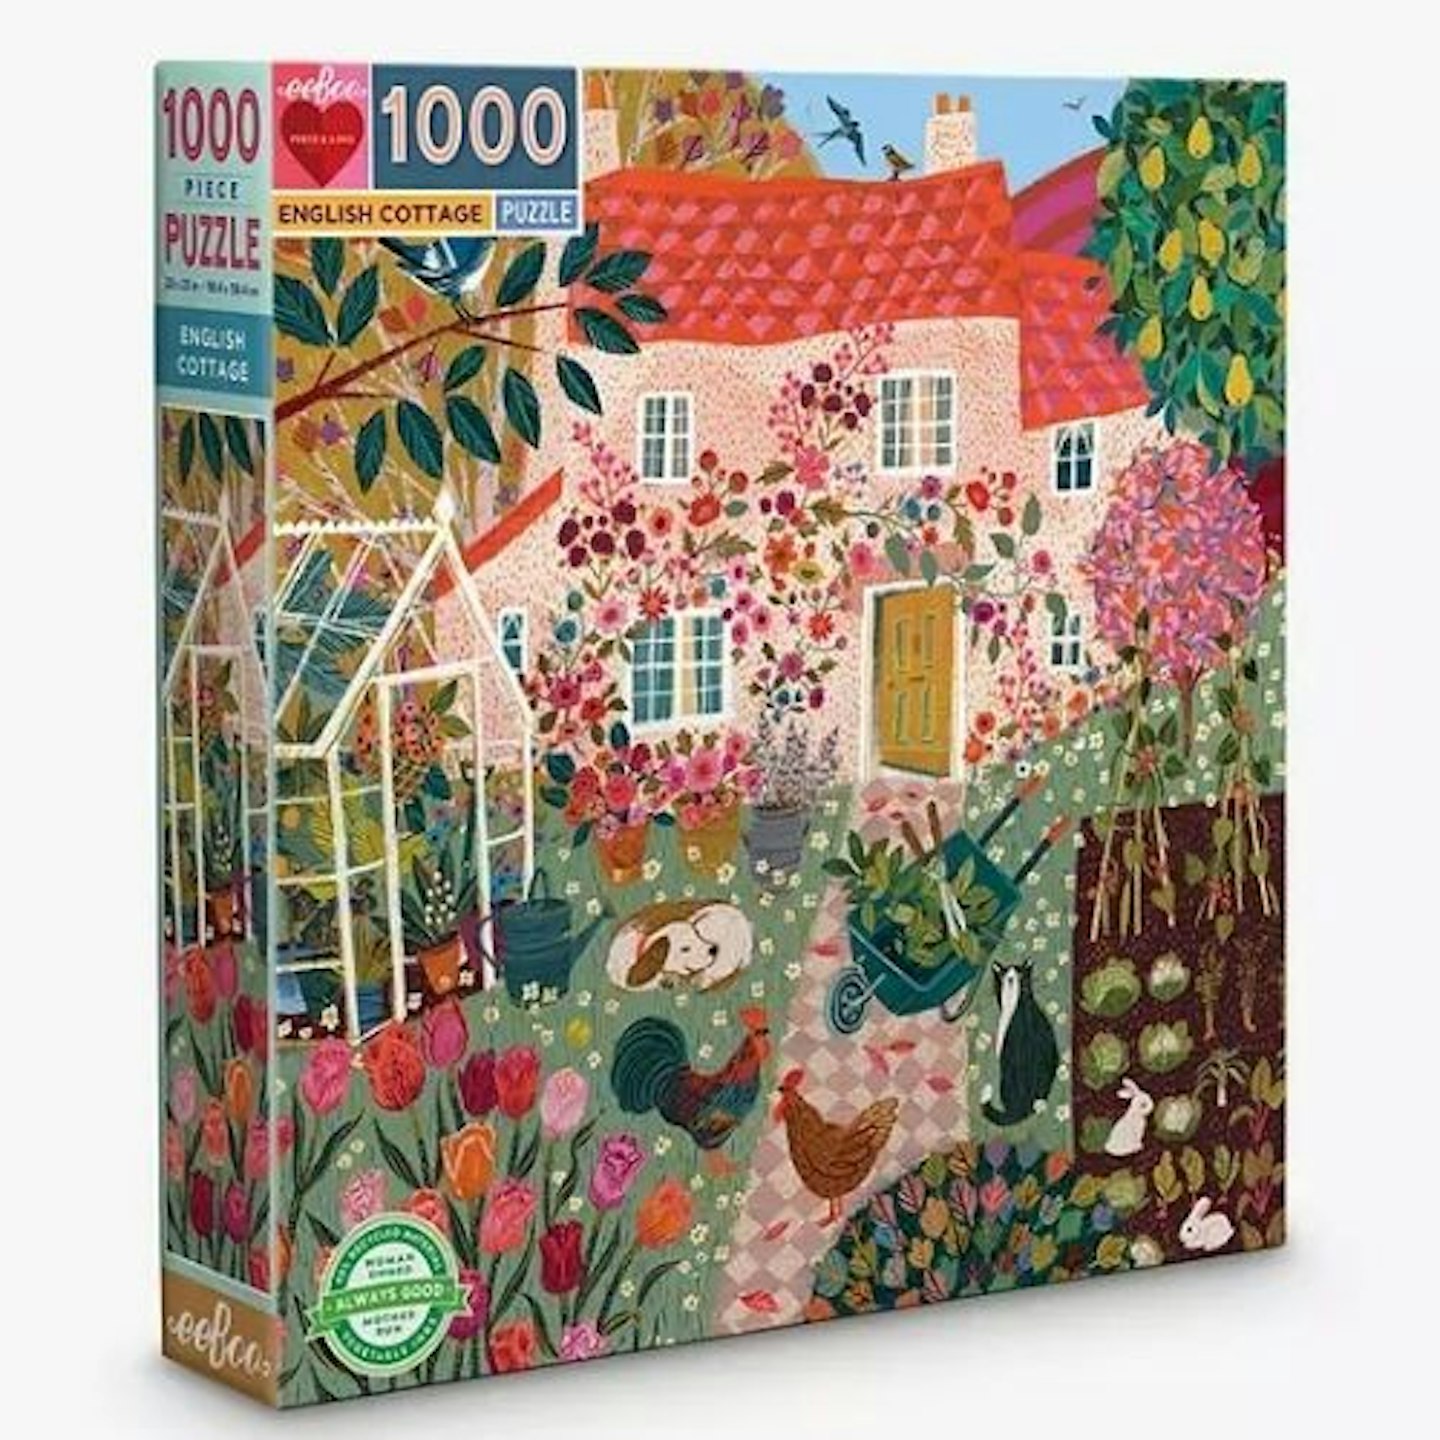 eeBoo English Cottage Jigsaw Puzzle, 1000 Pieces